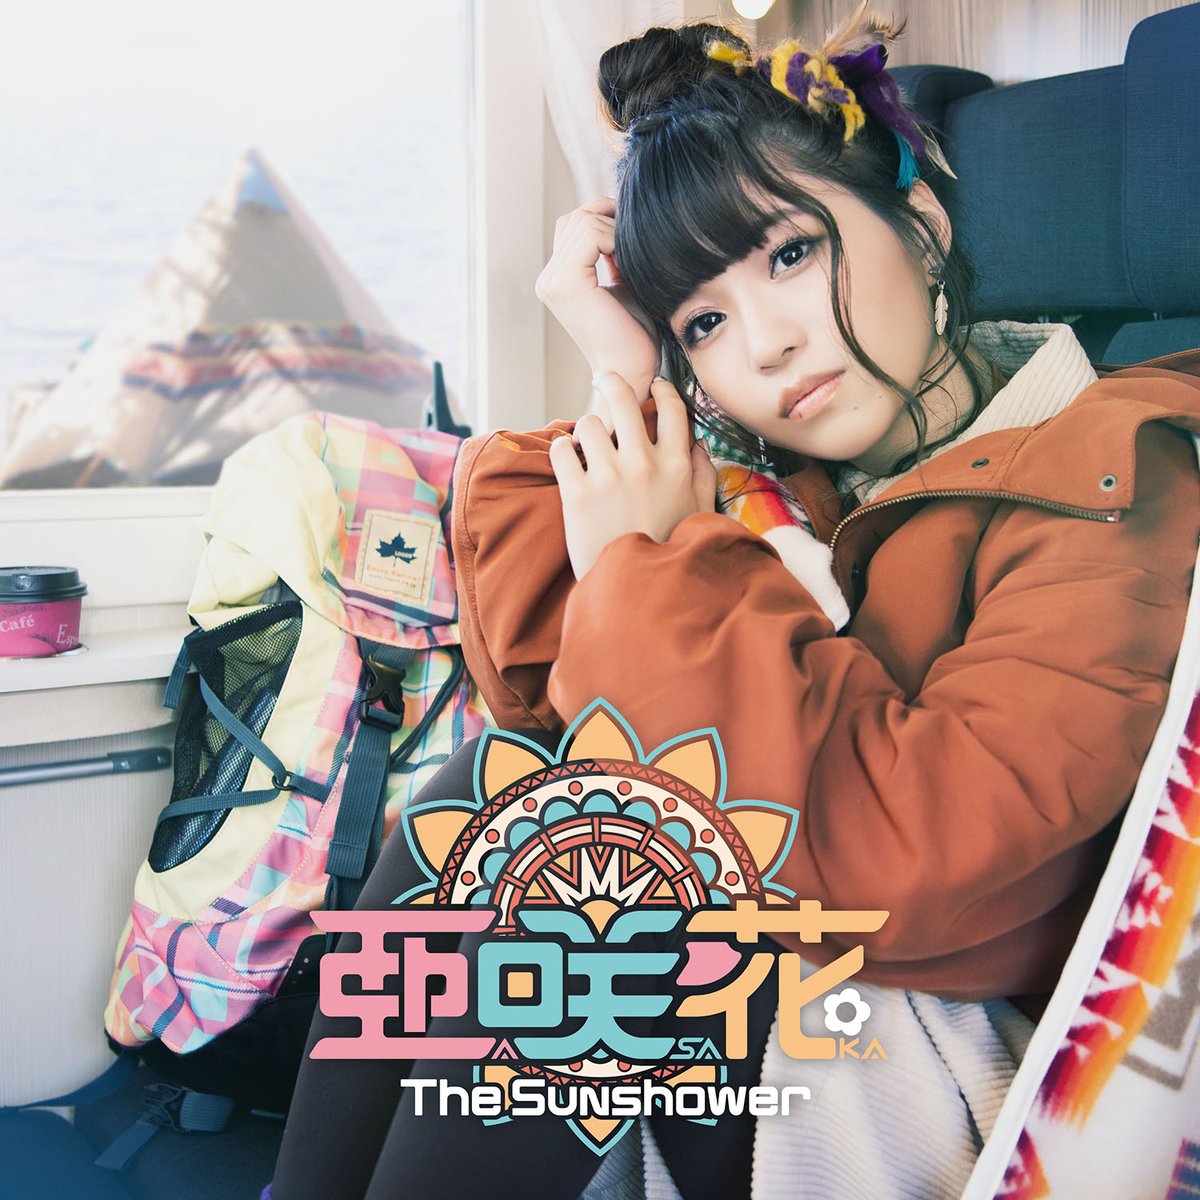 Cover for『Asaka - 1000miles』from the release『The Sunshower』